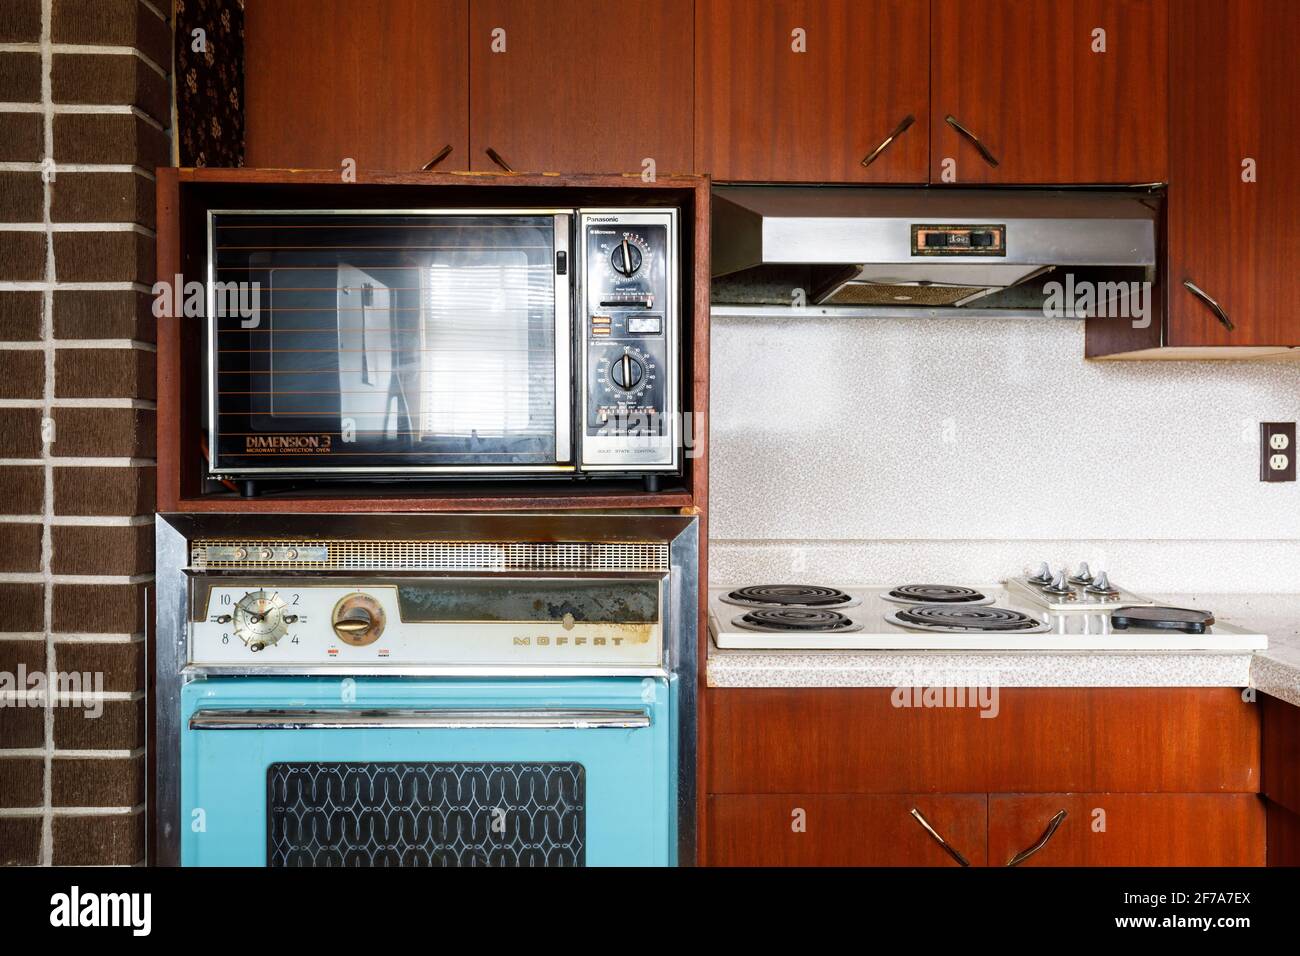 A 1960s Moffat 69 wall oven, 1980s Panasonic Dimension 3 microwave/convection oven and Moffat 40 built-in stovetop inside a retro kitchen. Stock Photo